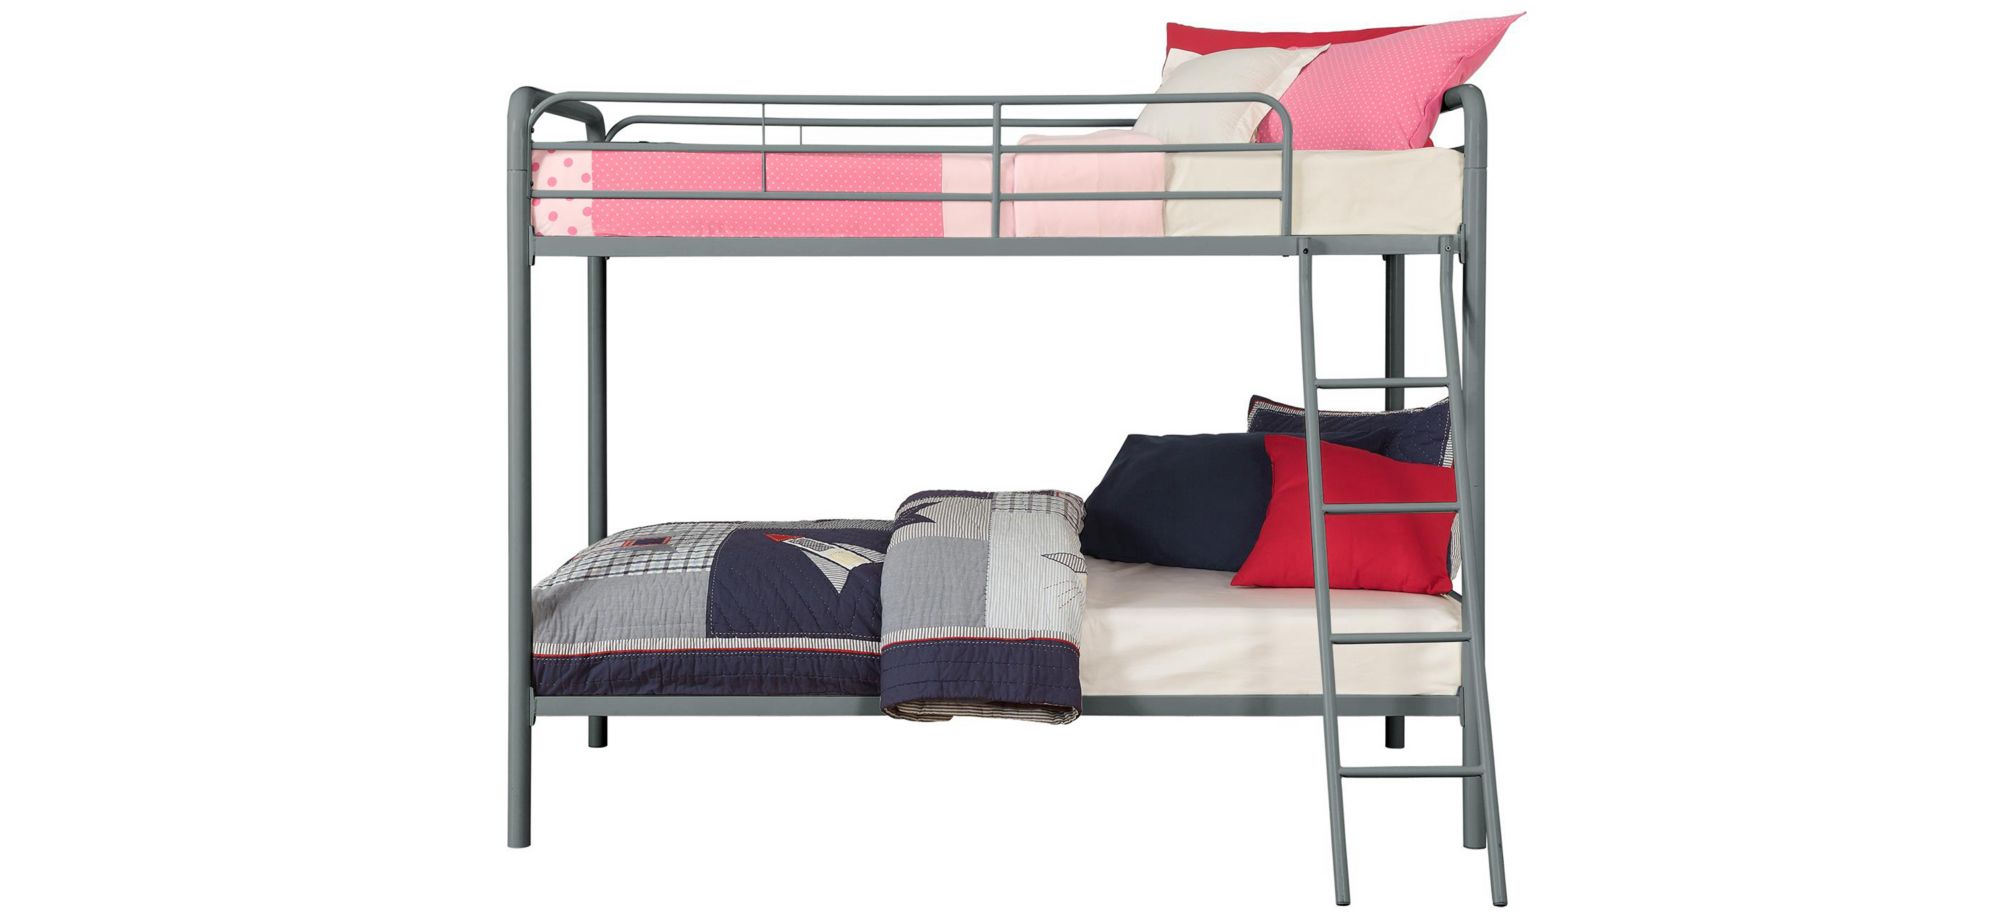 Atwater Living Eeva Twin over Twin Metal Bunk Bed in Silver by DOREL HOME FURNISHINGS